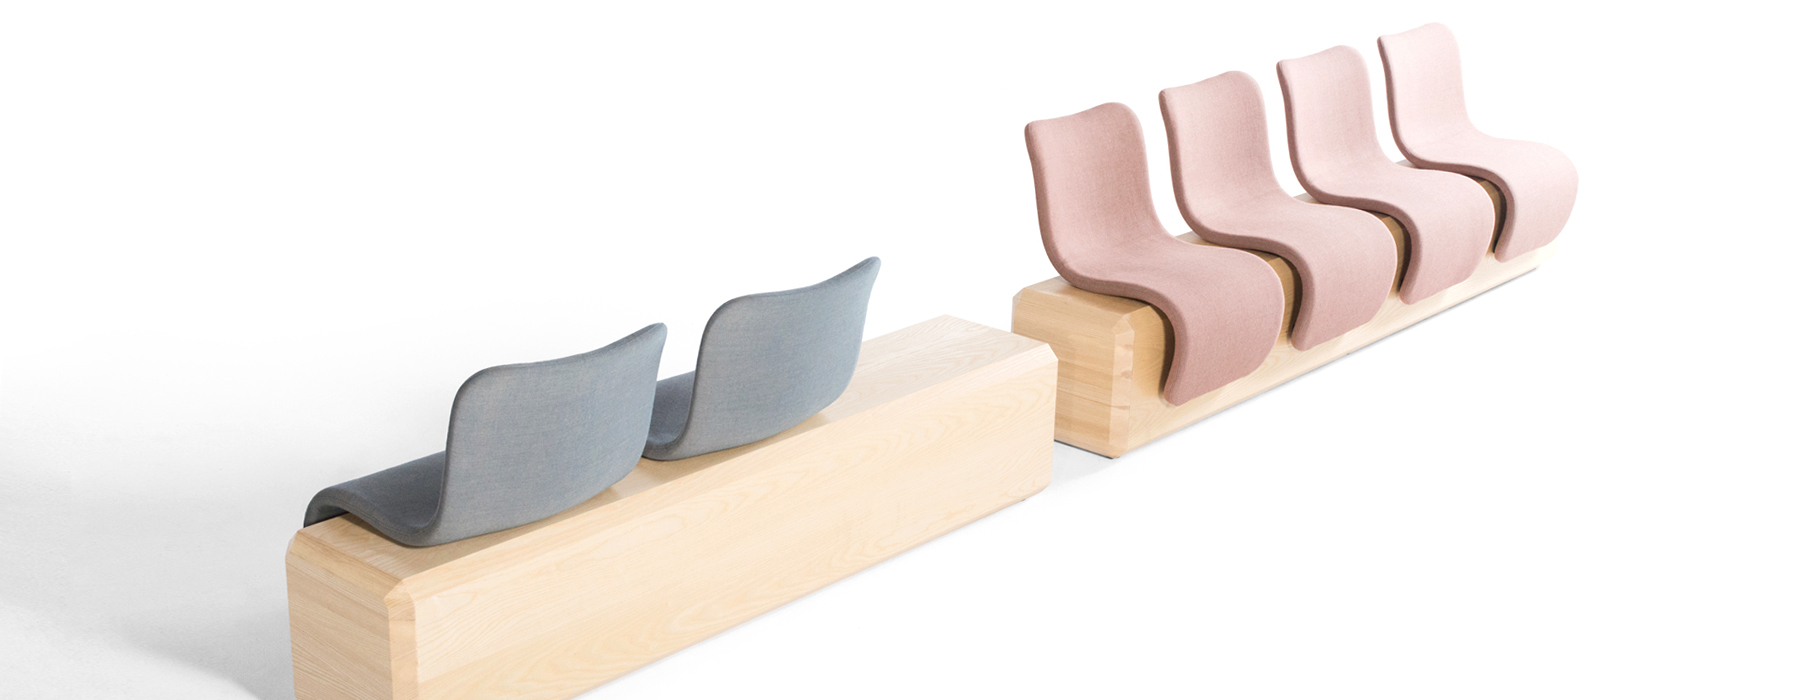 Ascent furniture collection was aimed at public spaces and is available in several colors